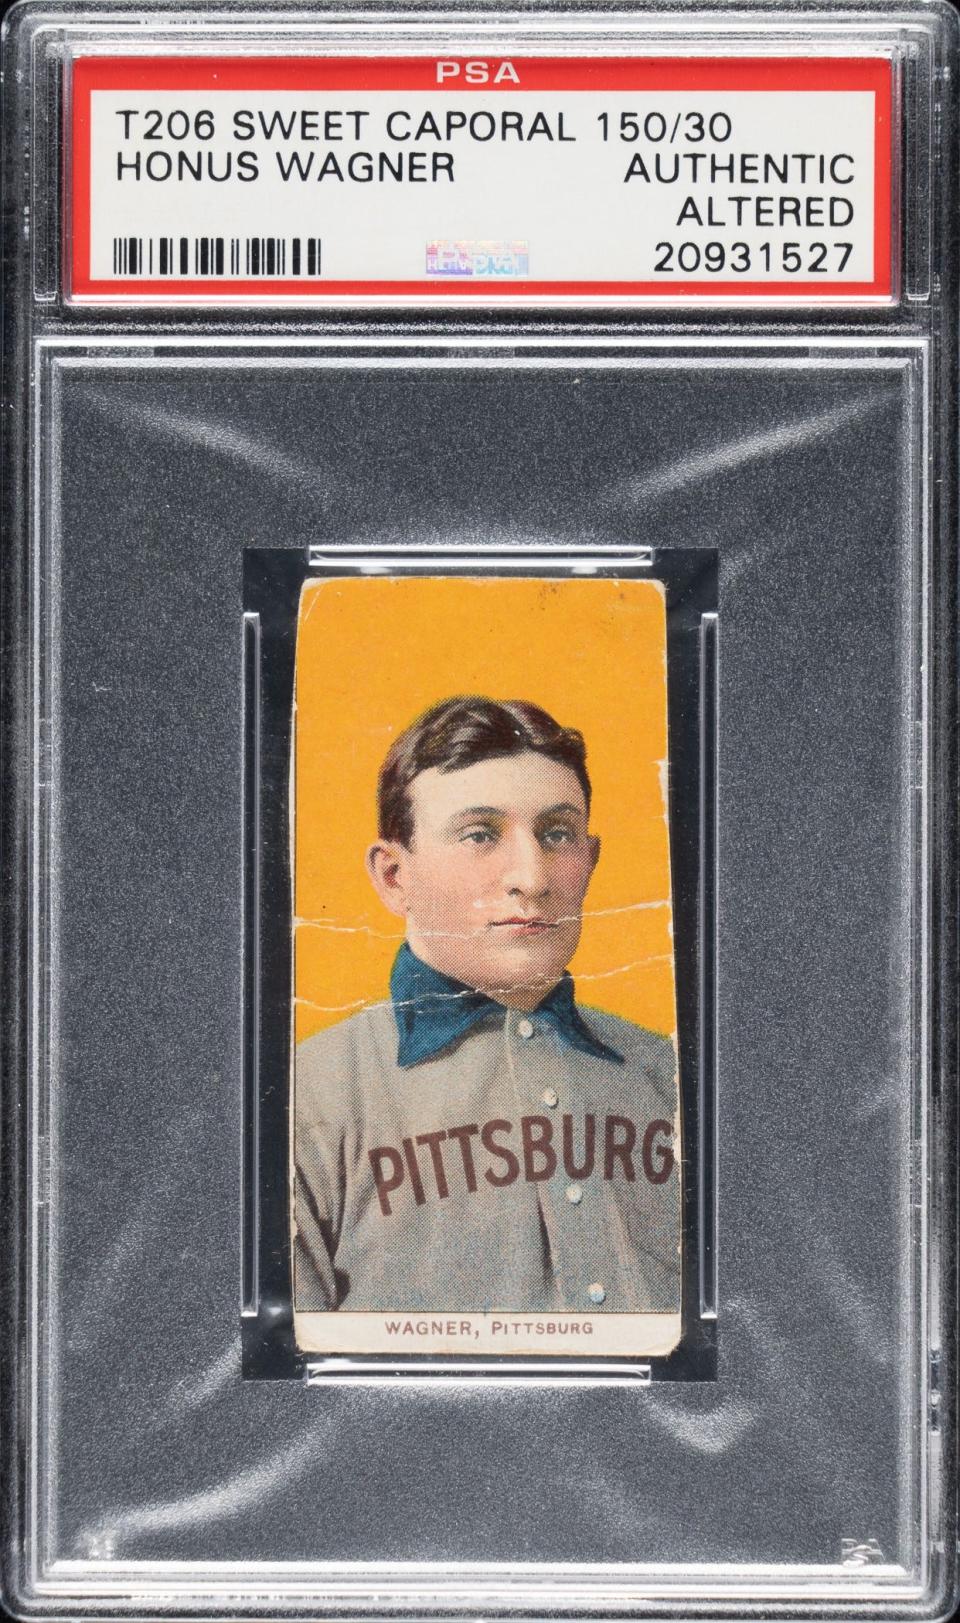 The T206 Honus Wagner card sold at auction for $1,528,066.